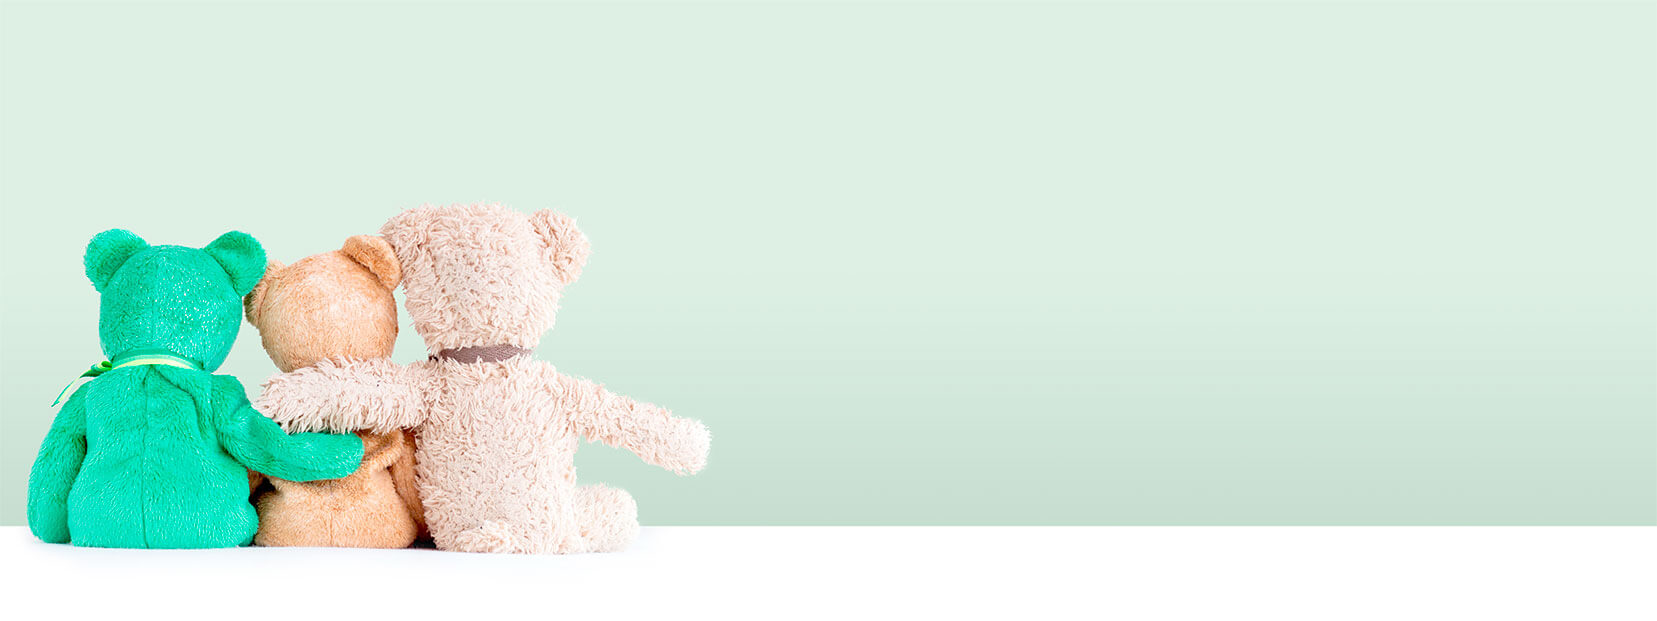 Three teddy bears hugging in front of a green background